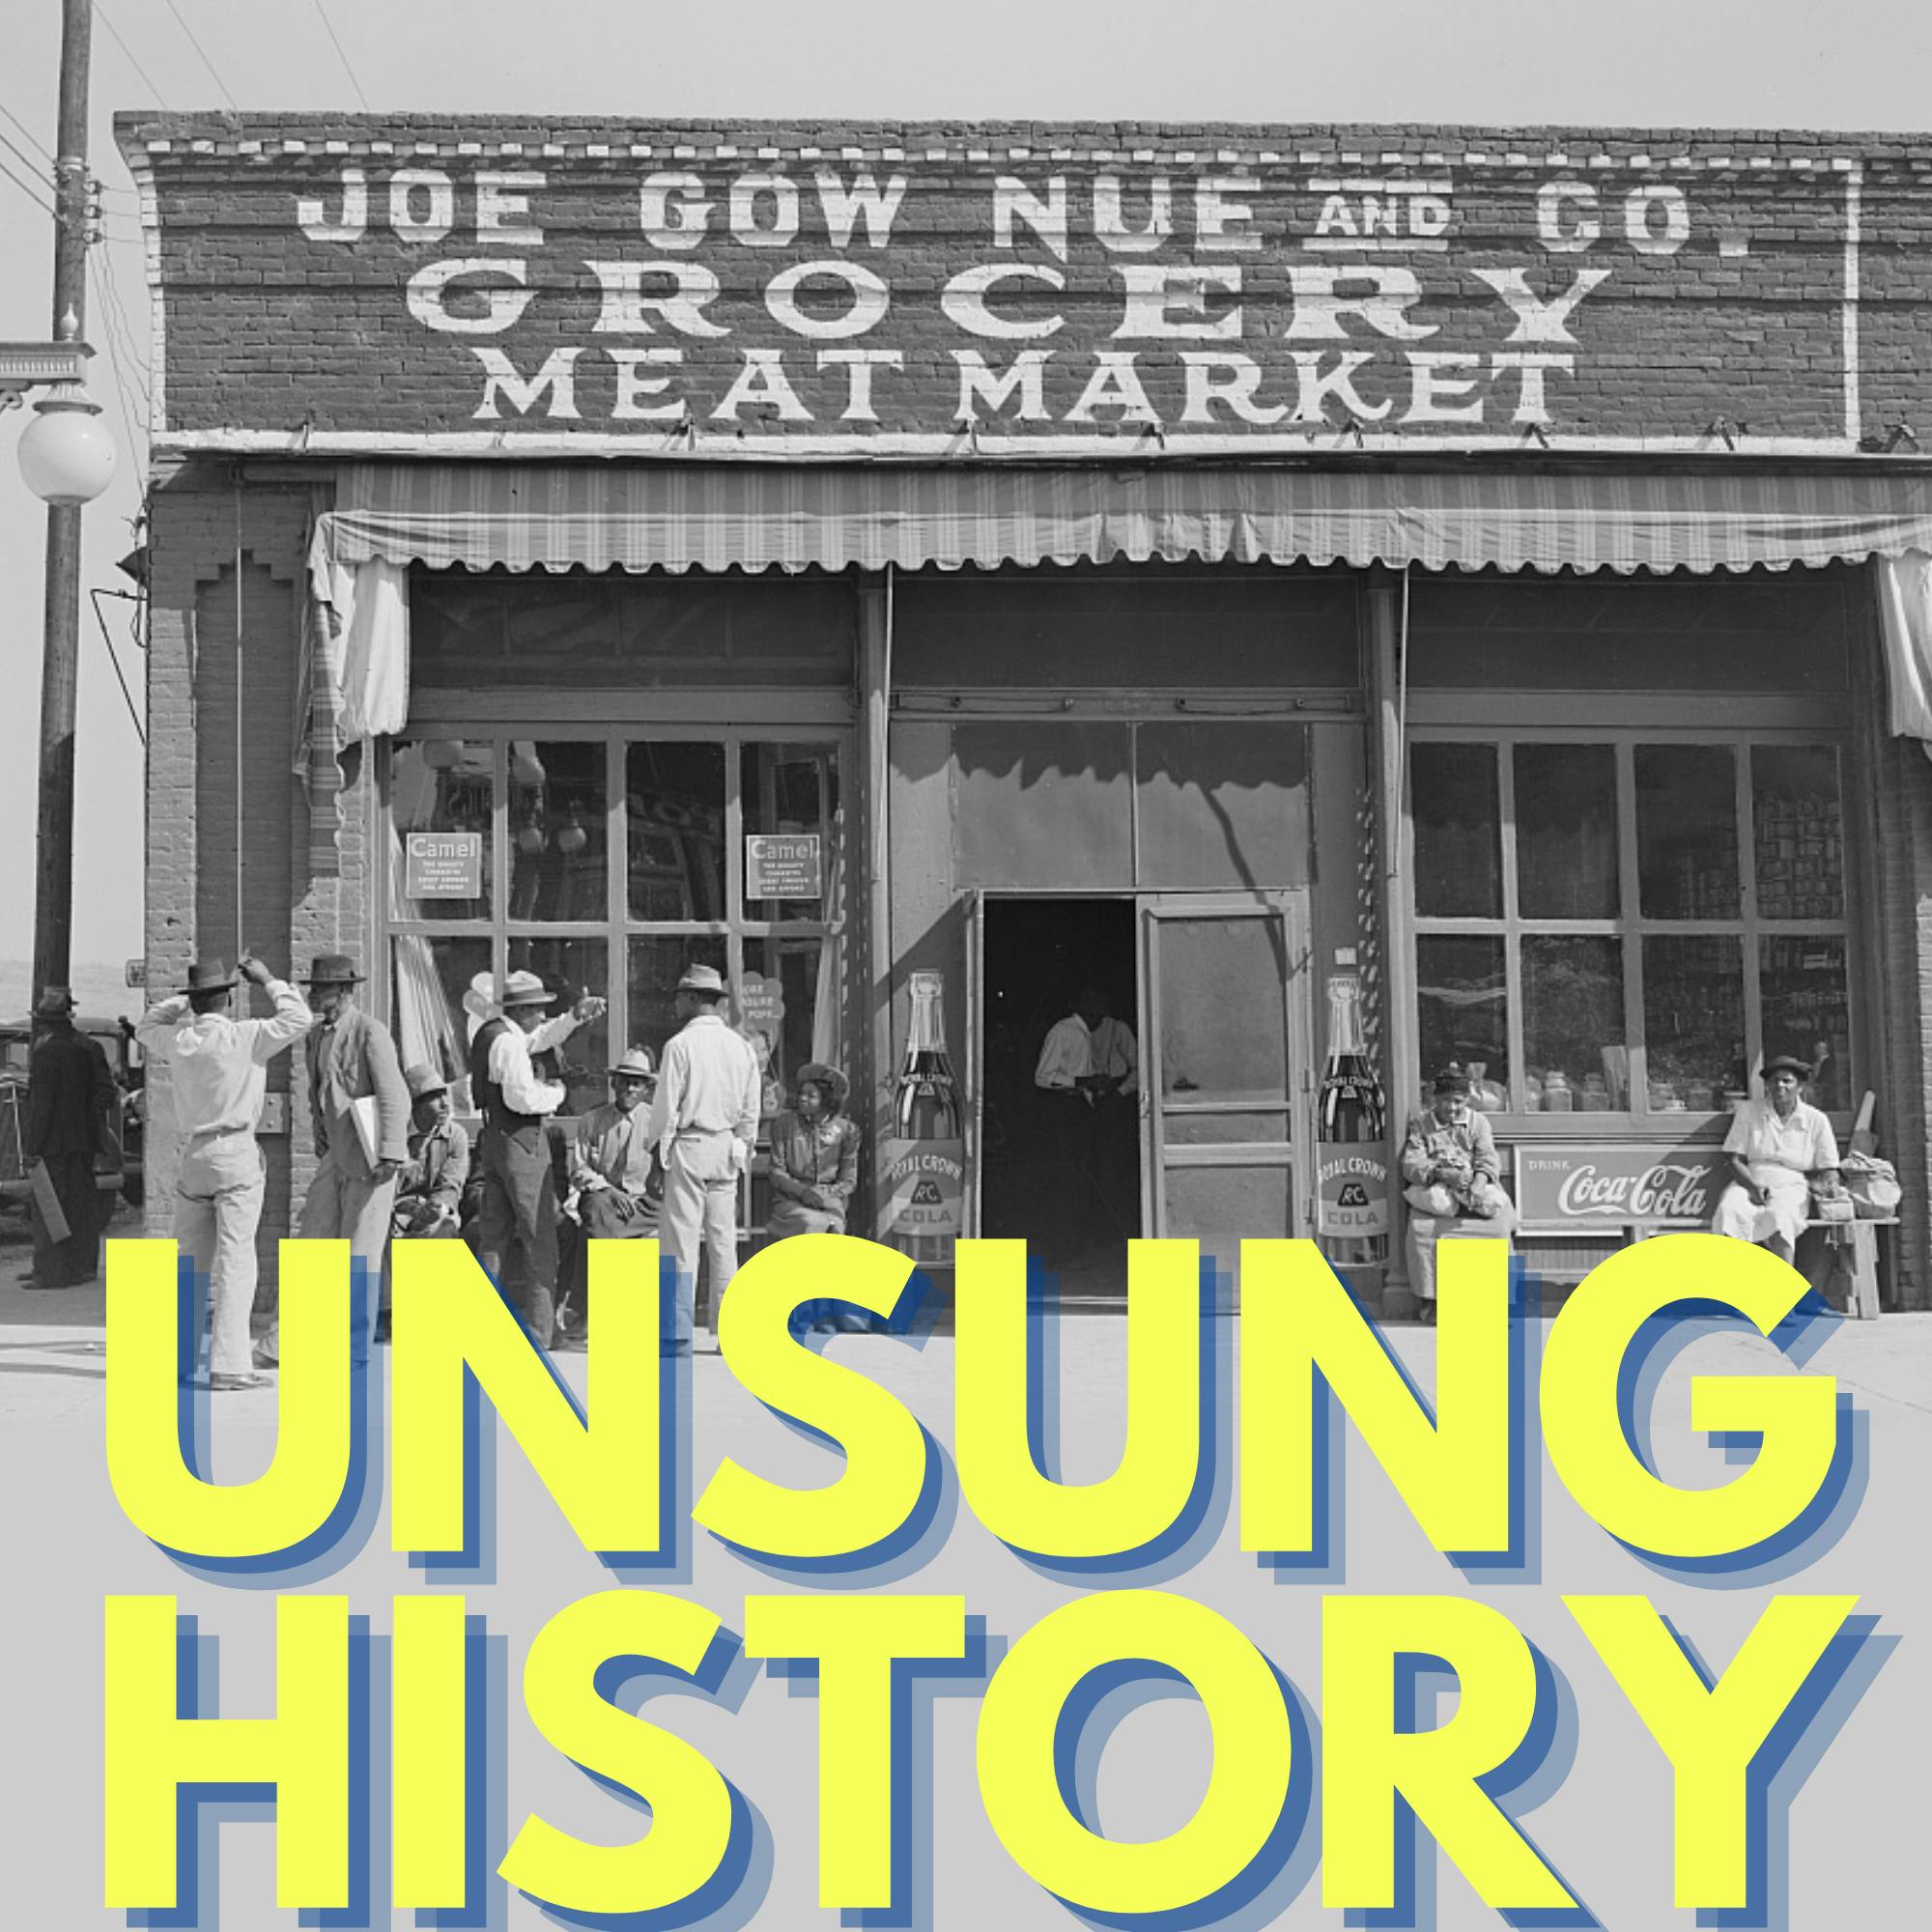 Chinese Grocery Stores in the Mississippi Delta Image